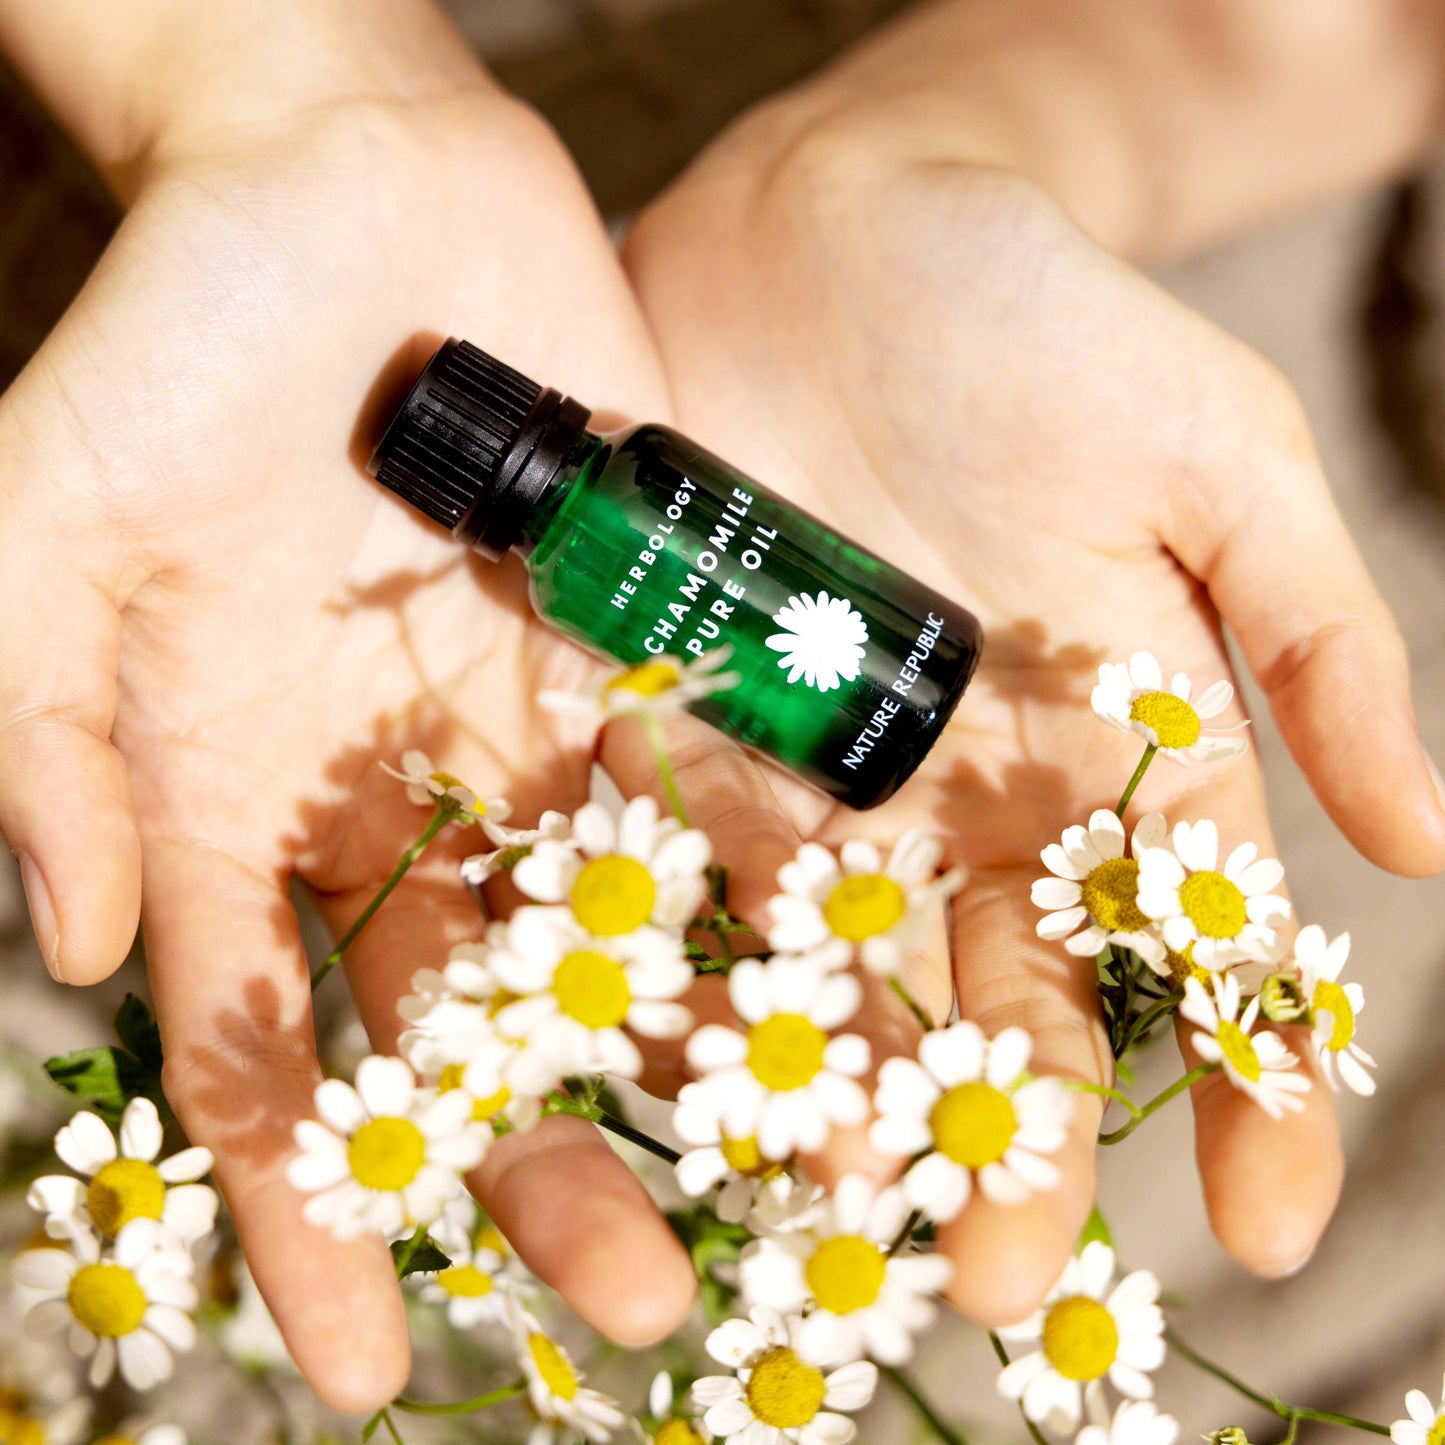 HERBOLOGY Chamomile Pure Oil